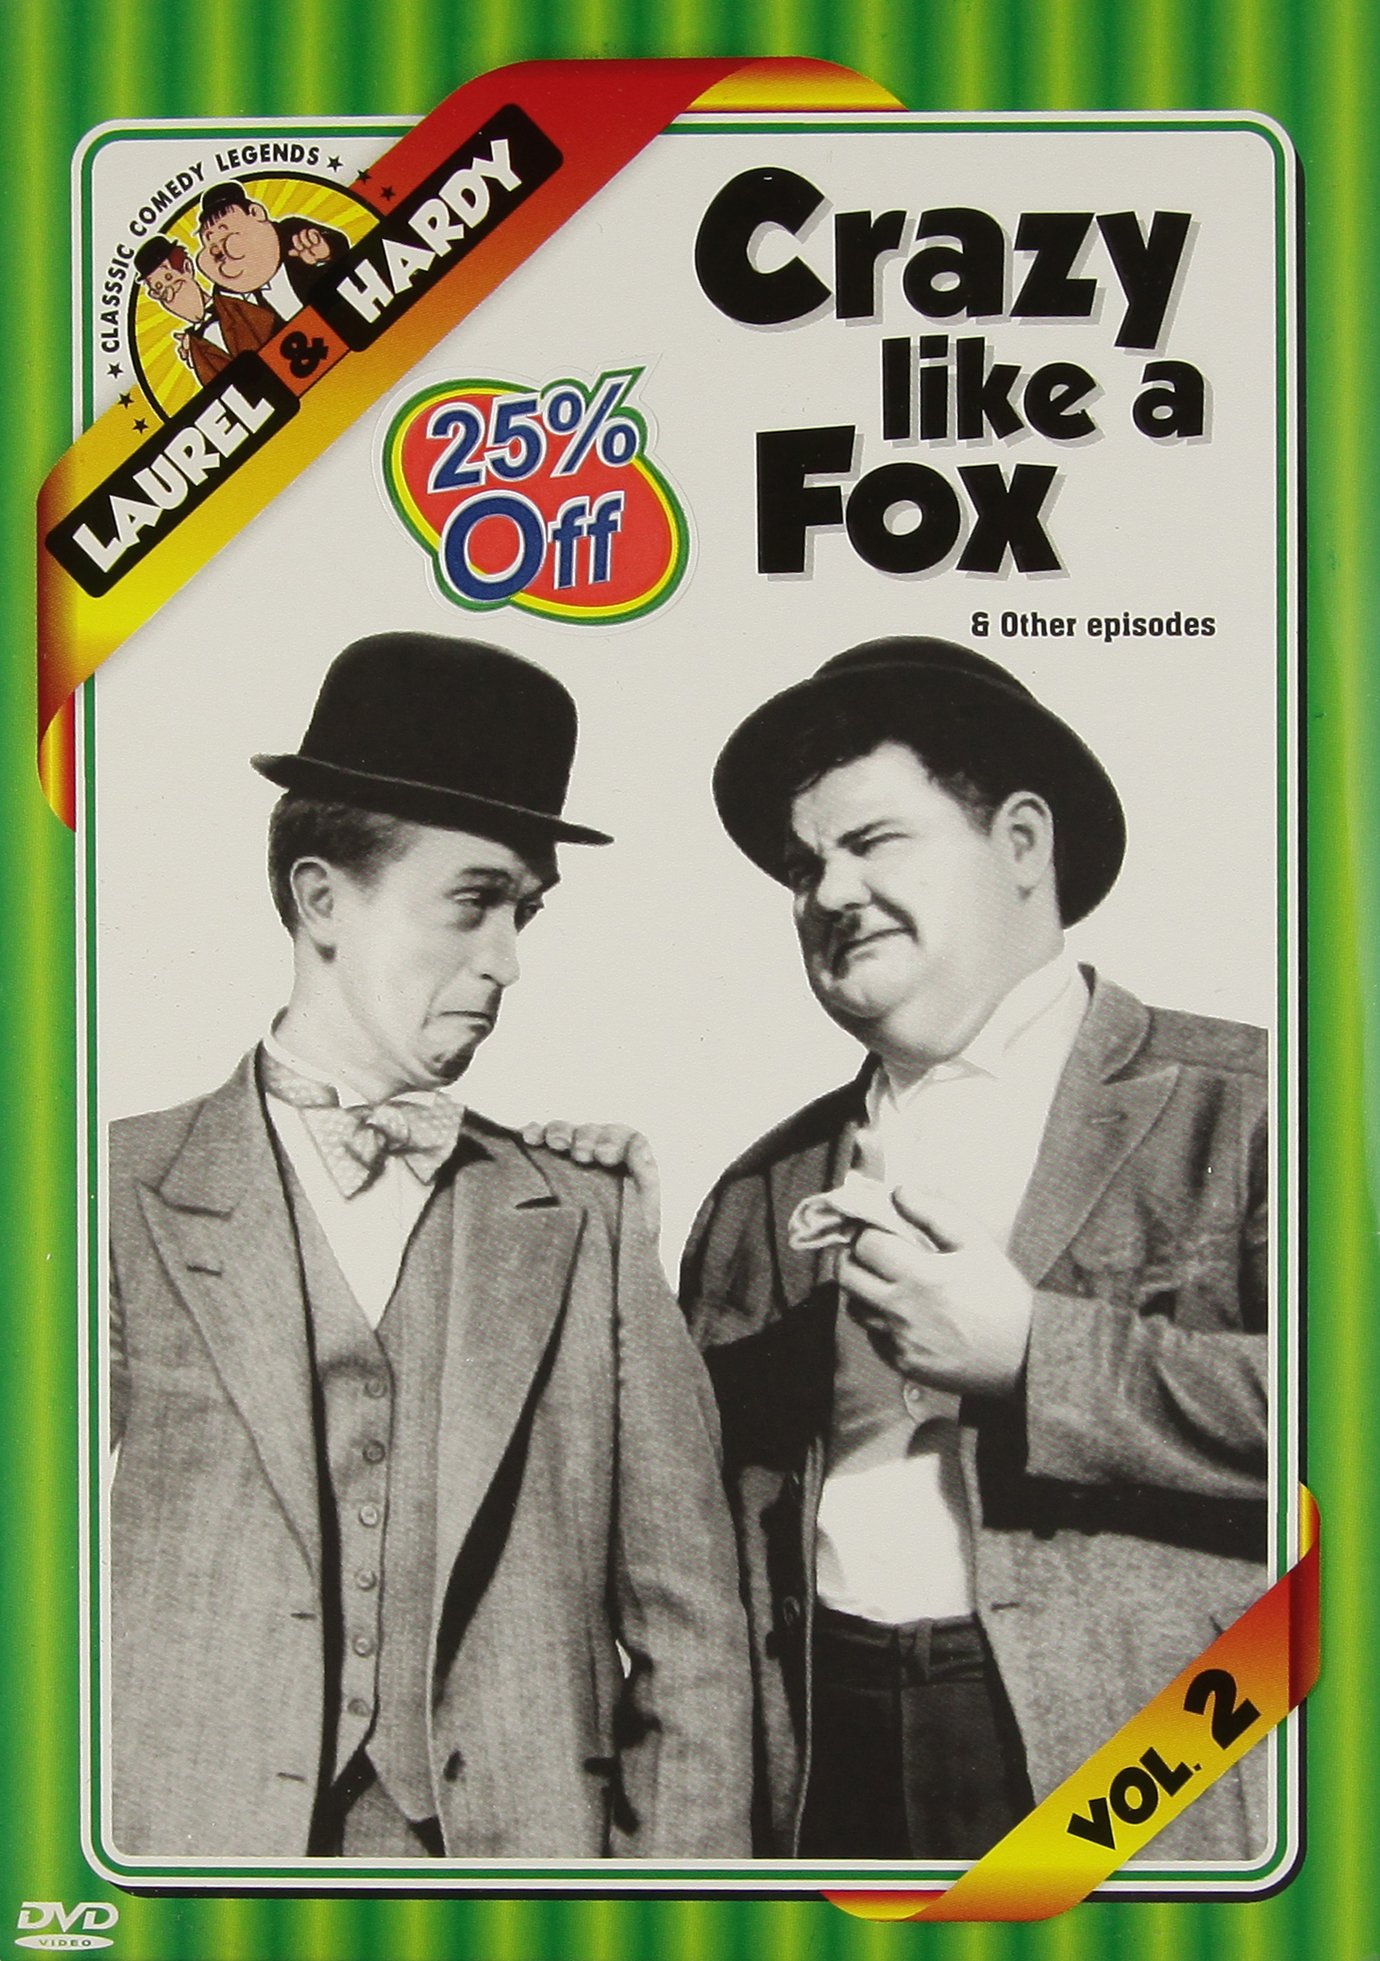 laurel-and-hardy-vol-2-crazy-like-a-fox-movie-purchase-or-watch-onl